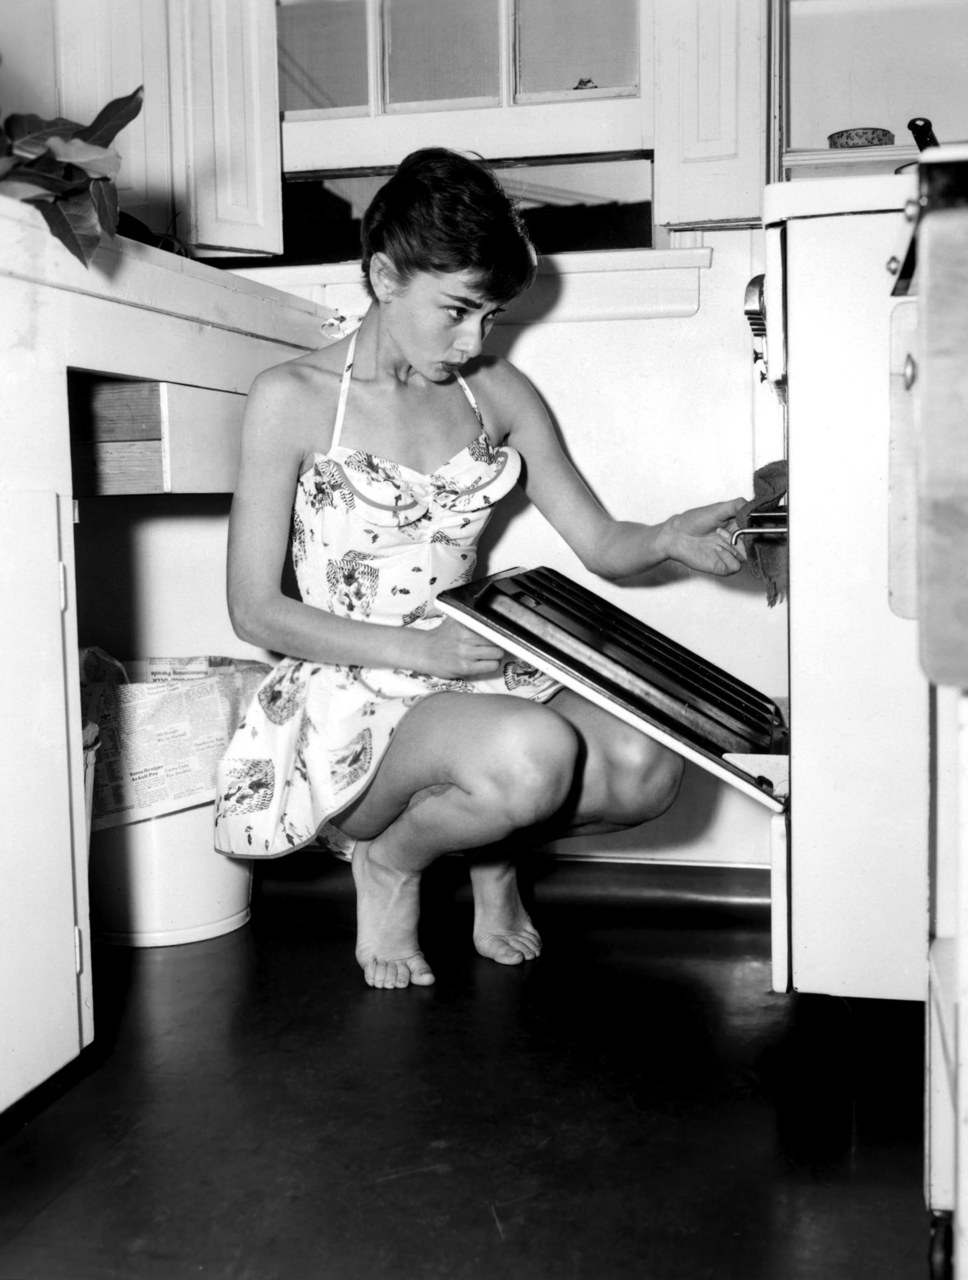 A woman that knew her way around the kitchen. ahhh the good ol days.